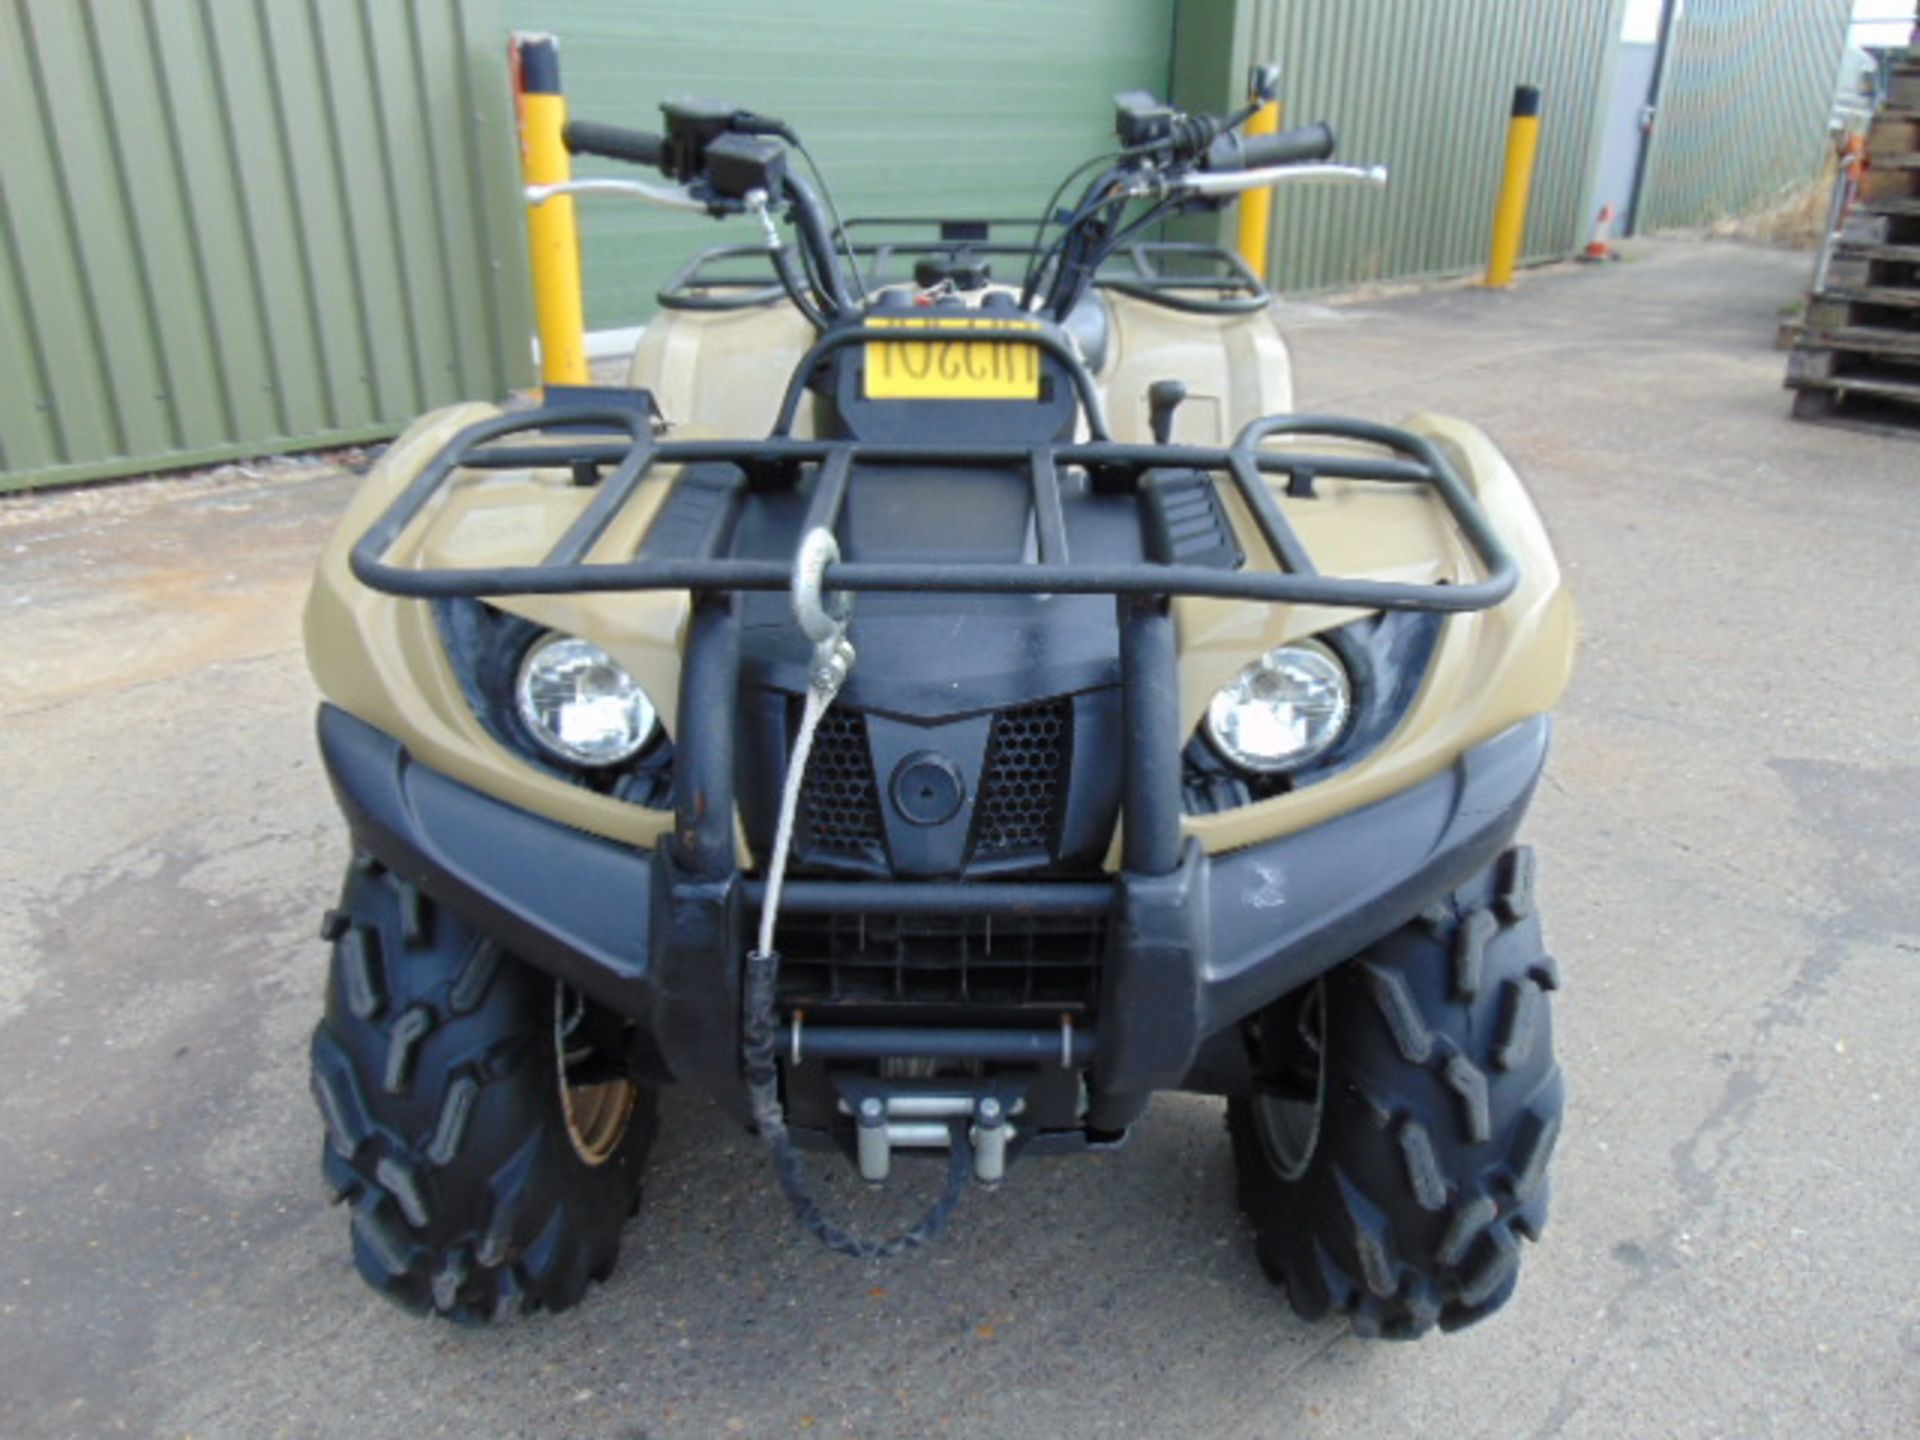 Yamaha Grizzly 450 4 x 4 ATV Quad Bike Complete with Winch - Image 2 of 23